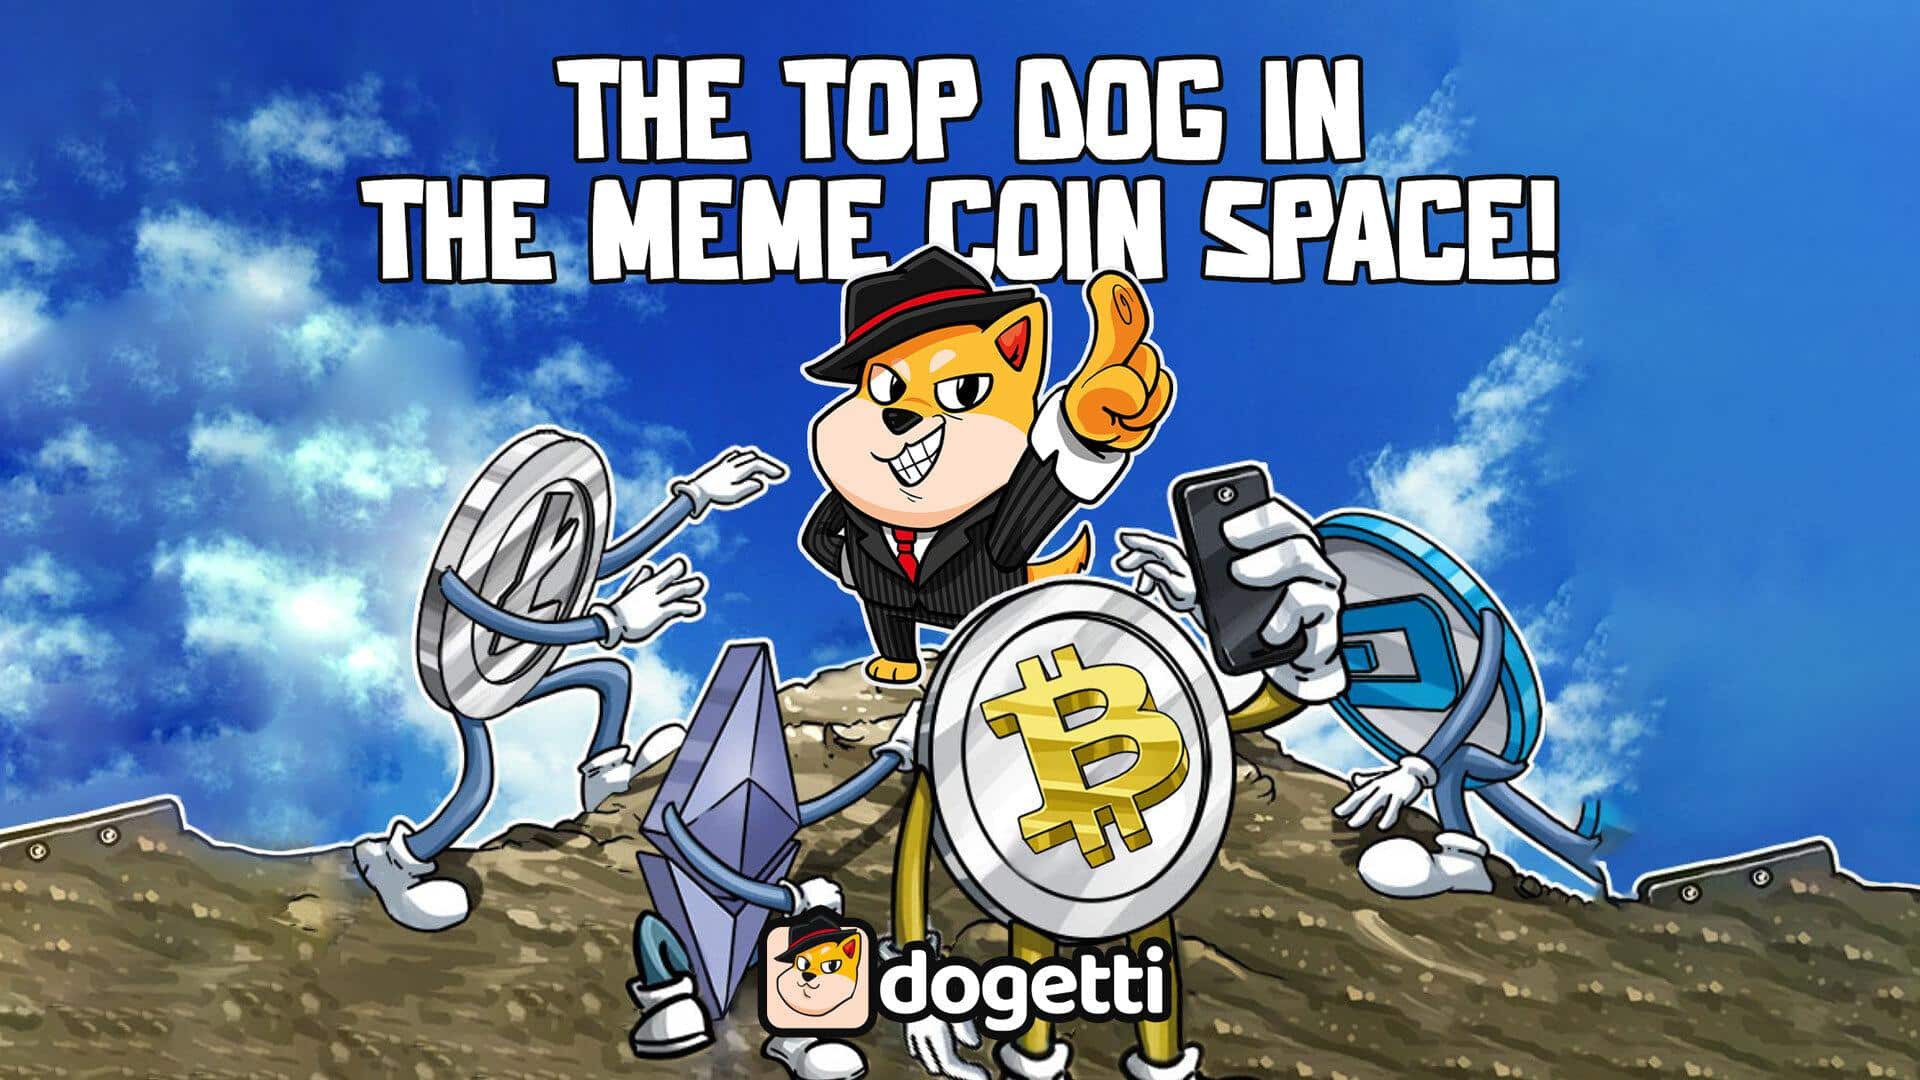 Crypto Picks: Polygon, Polkadot, and Dogetti - What’s The Next Big Thing in DeFi?